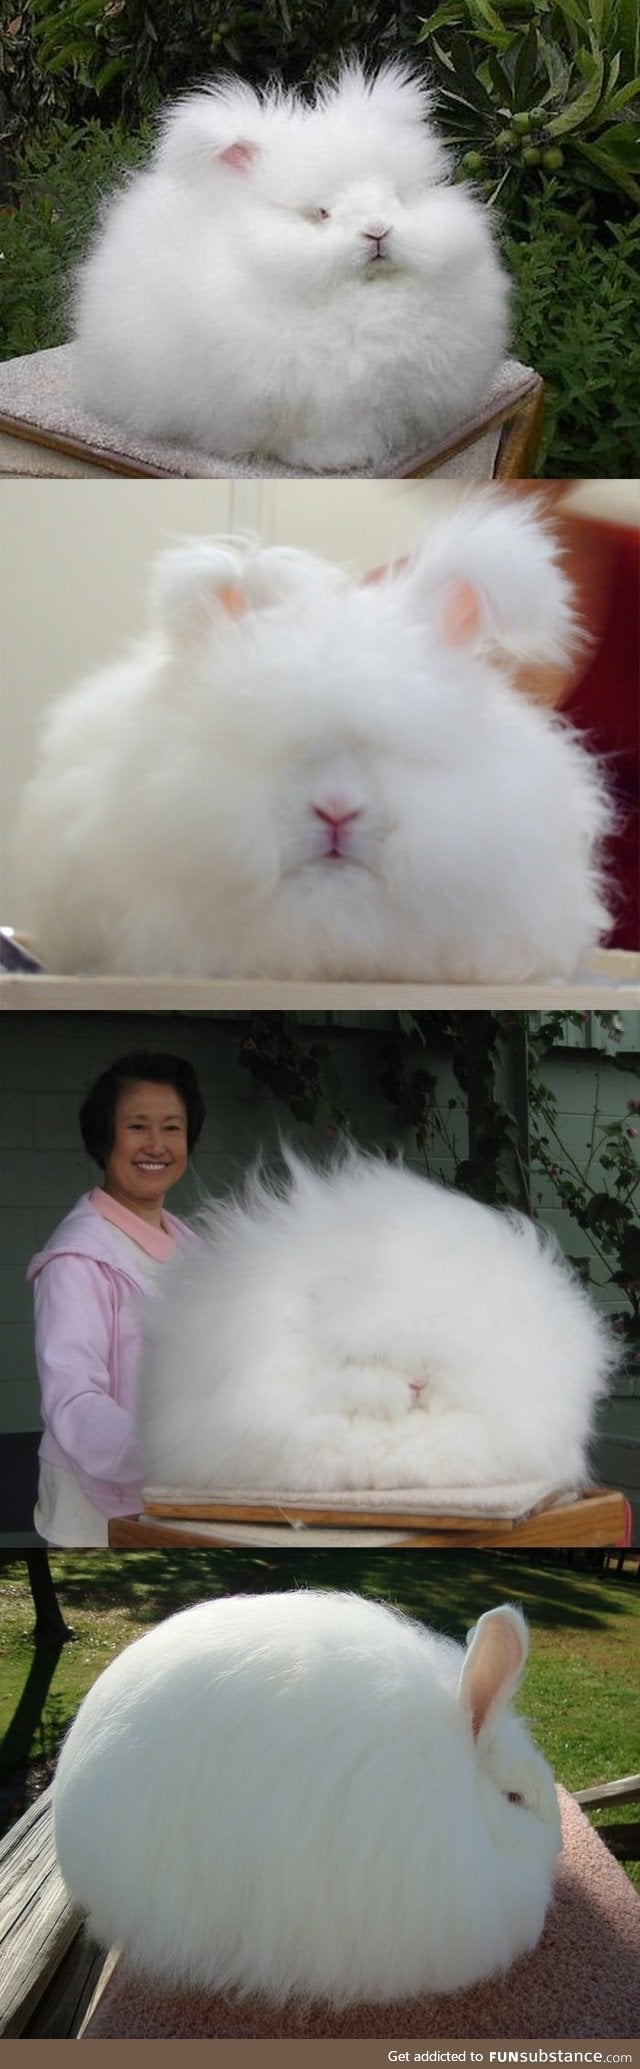 I present you the fluffiest creature ever